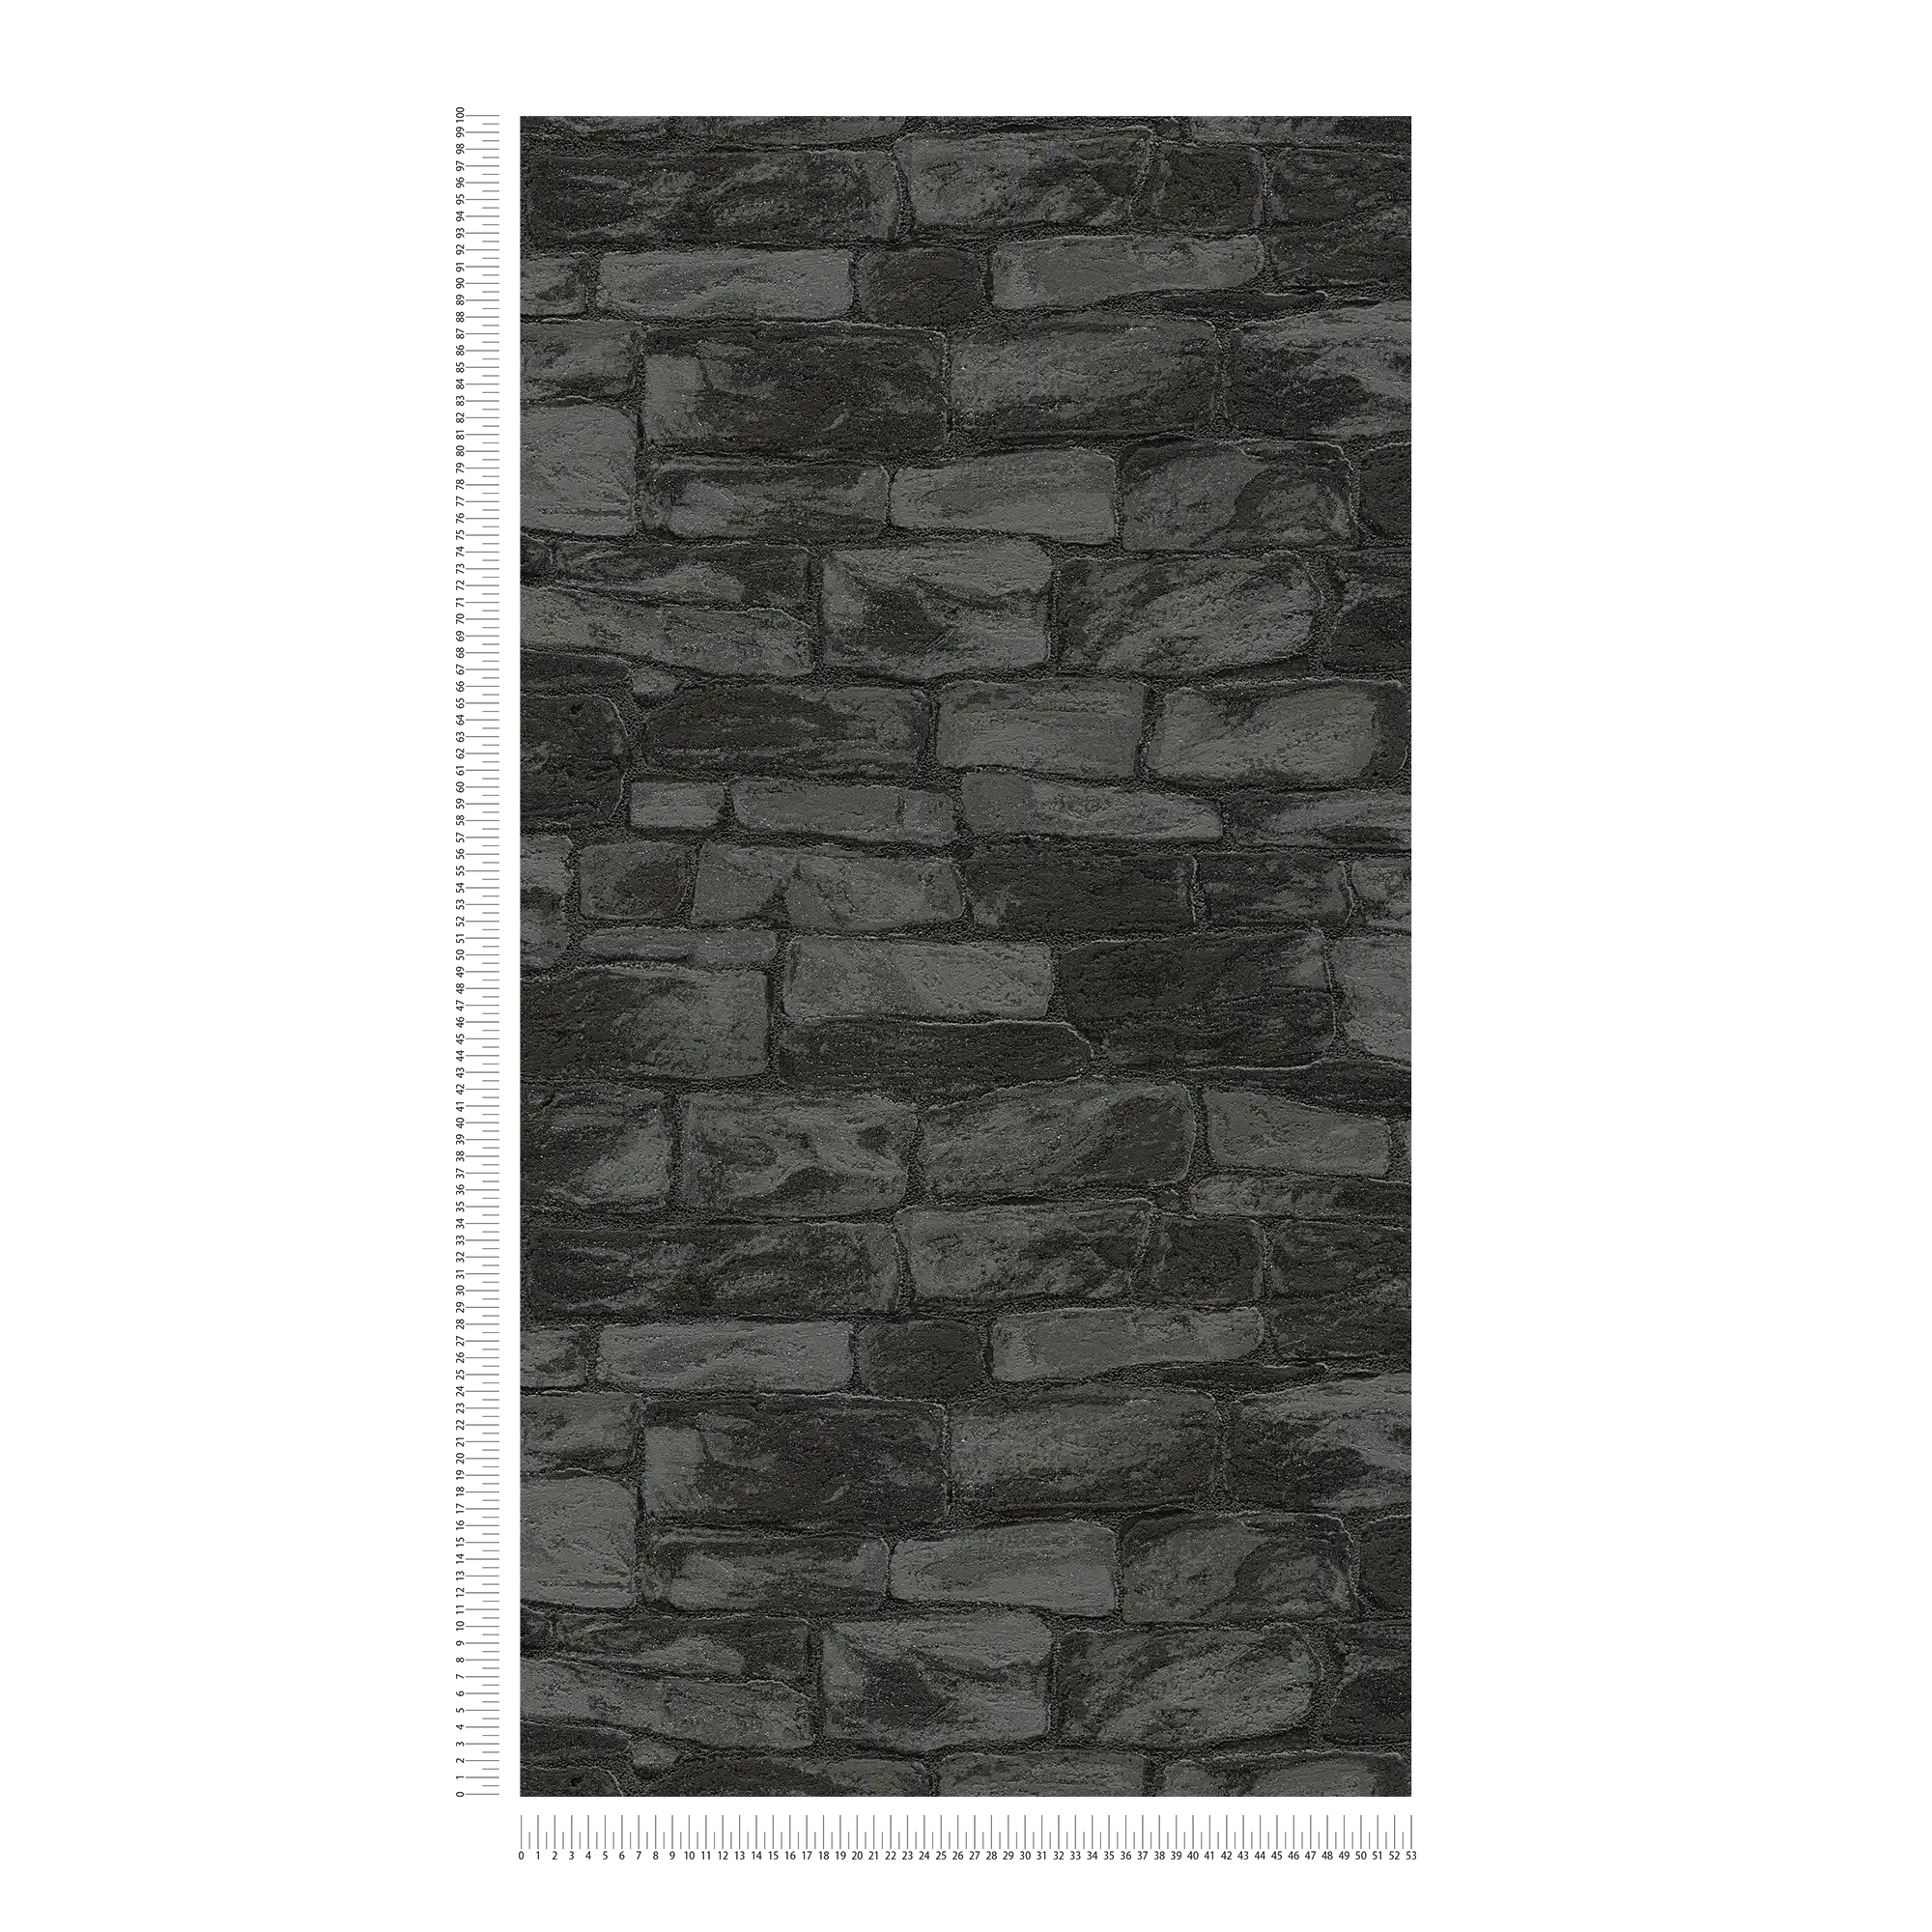             Wallpaper stone look with 3D texture pattern - black
        